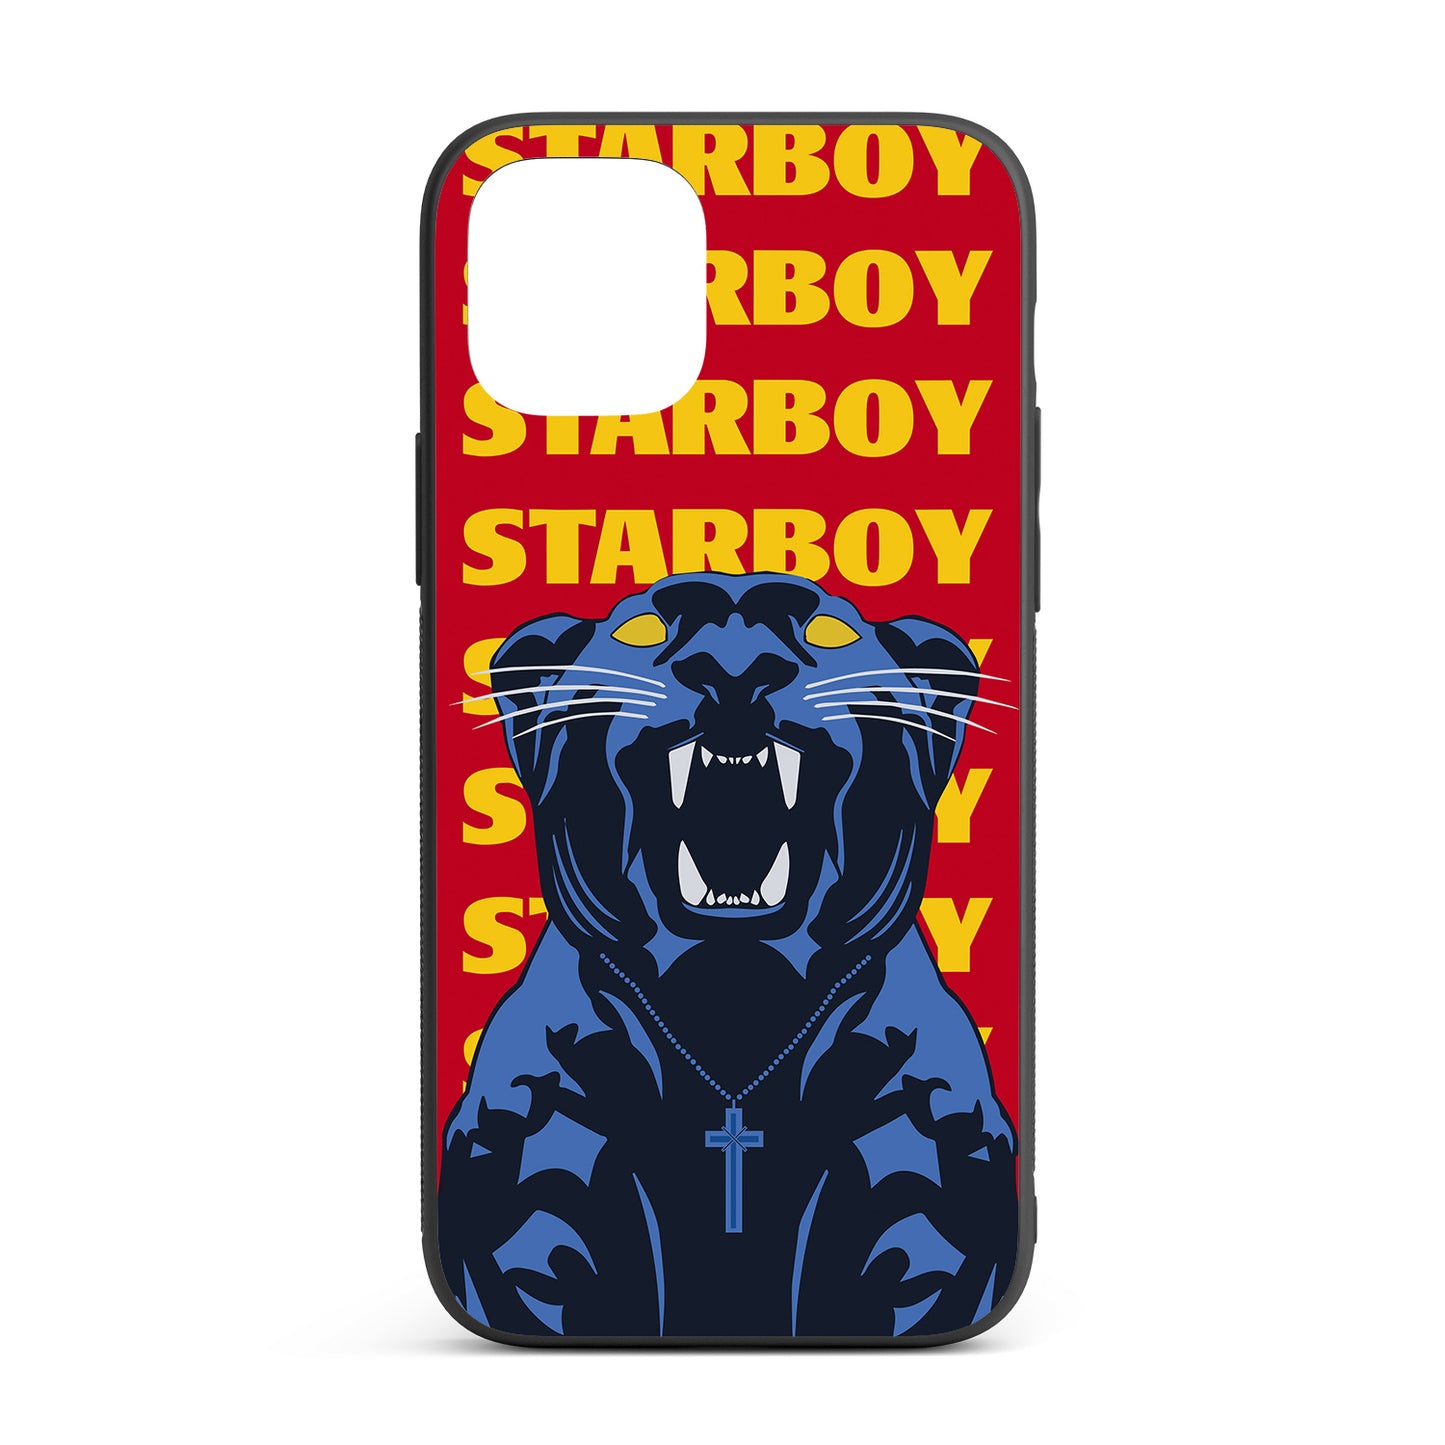 Starboy iPhone glass case